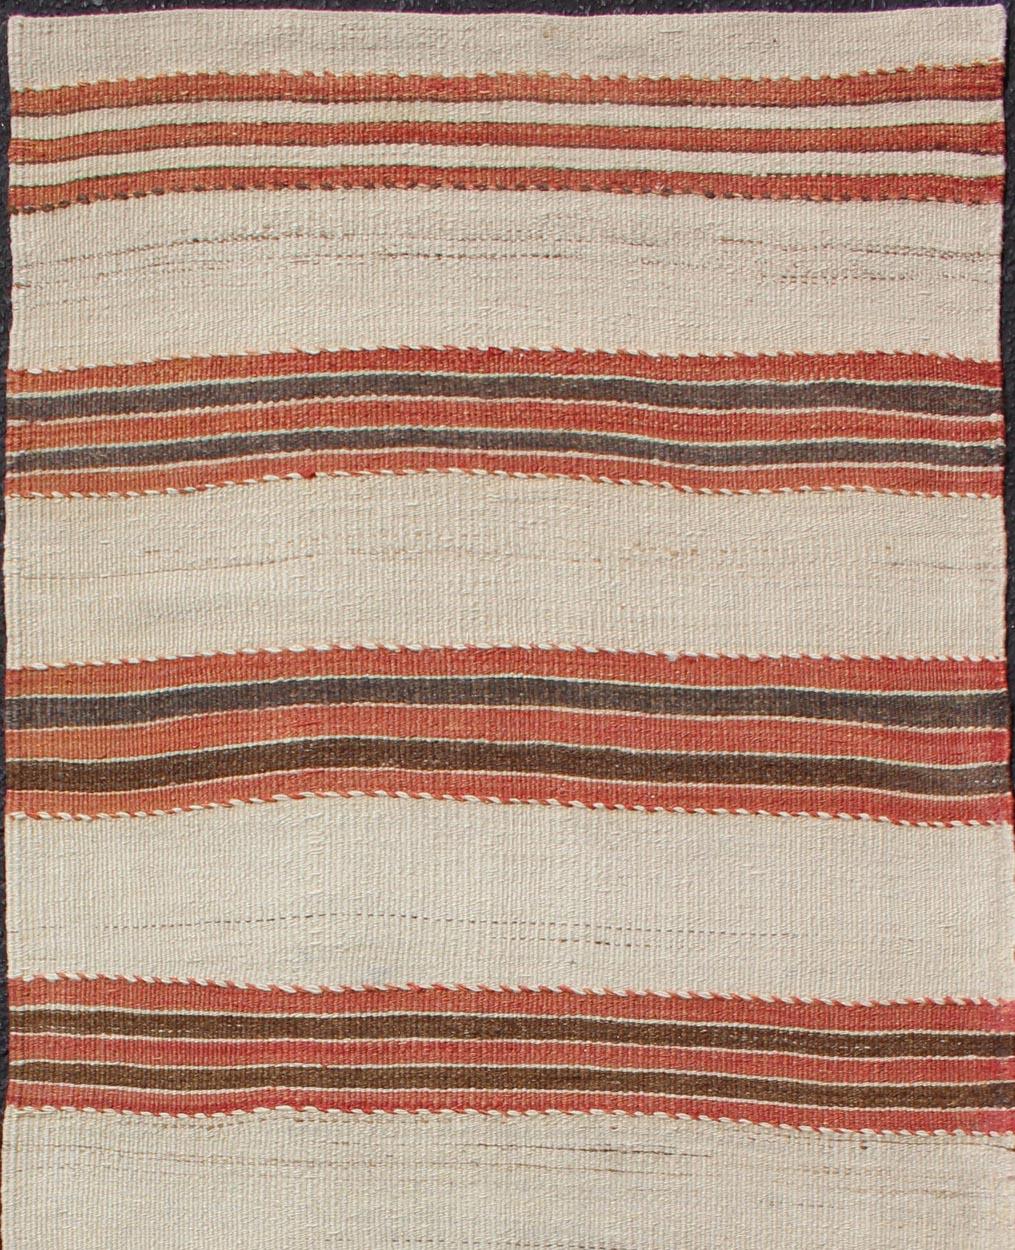 Red, Ivory and brown vintage Kilim from Turkey with Minimalist design in stripes, rug EN-179677, country of origin / type: Turkey / Kilim, circa 1950

This vintage striped design Kilim from Turkey rendered in shade of brown's, taupe's, red, and